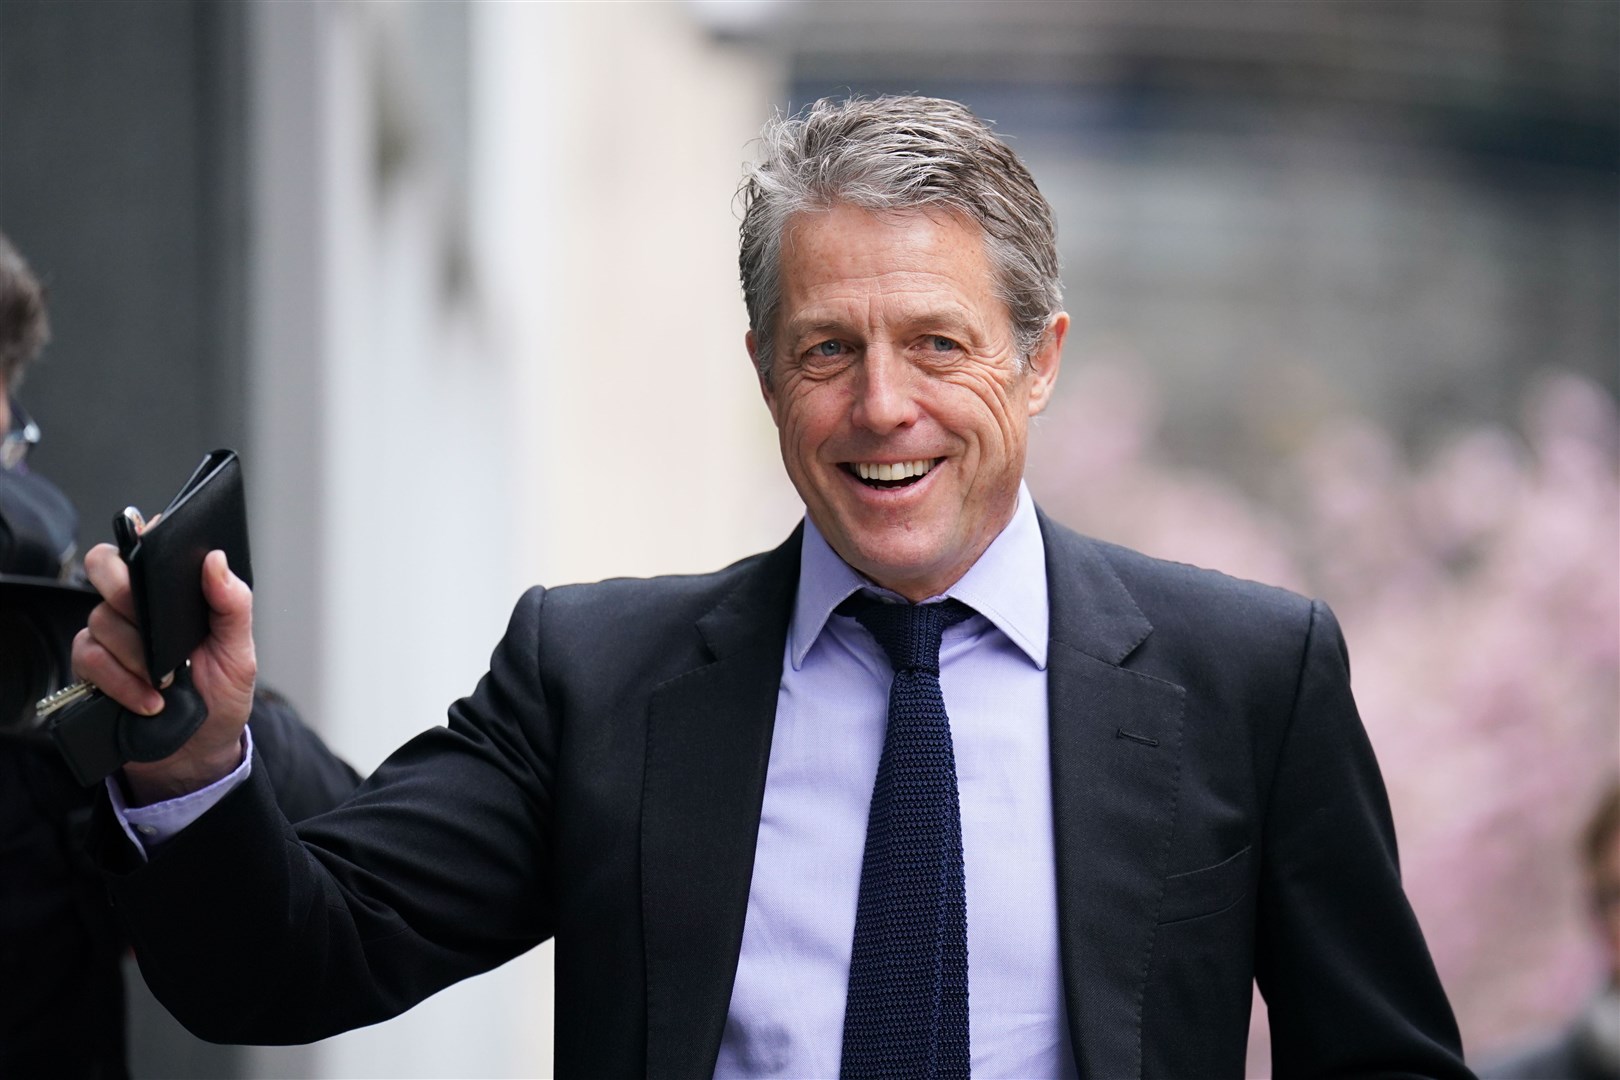 Hugh Grant is joining Harry in suing News Group Newspapers over allegations of unlawful information gathering (James Manning/PA)